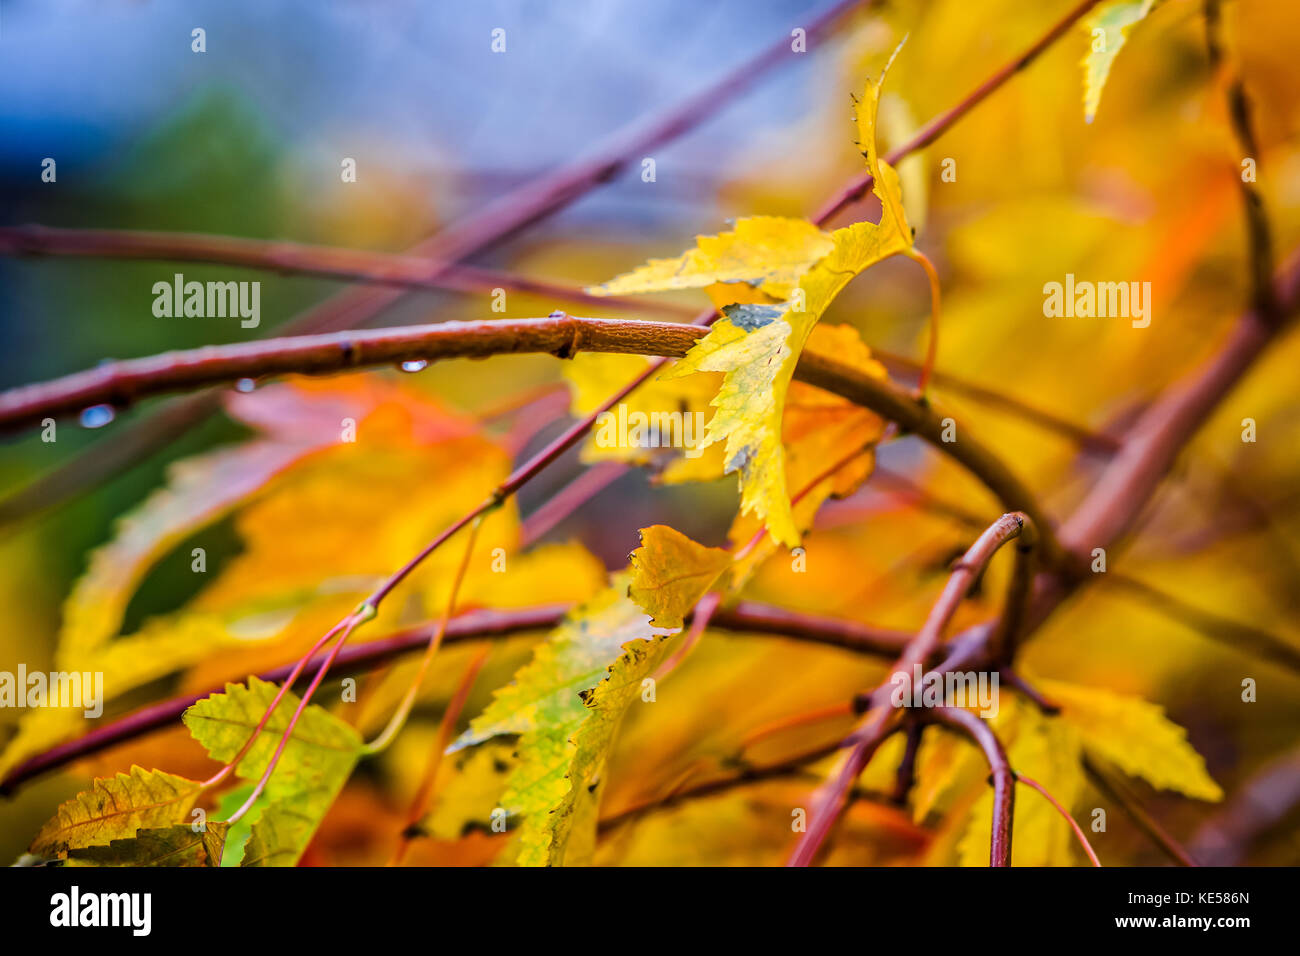 Wet yellow leaves on a tree branches, wet rainy day, colorful golden autumn scene. Stock Photo